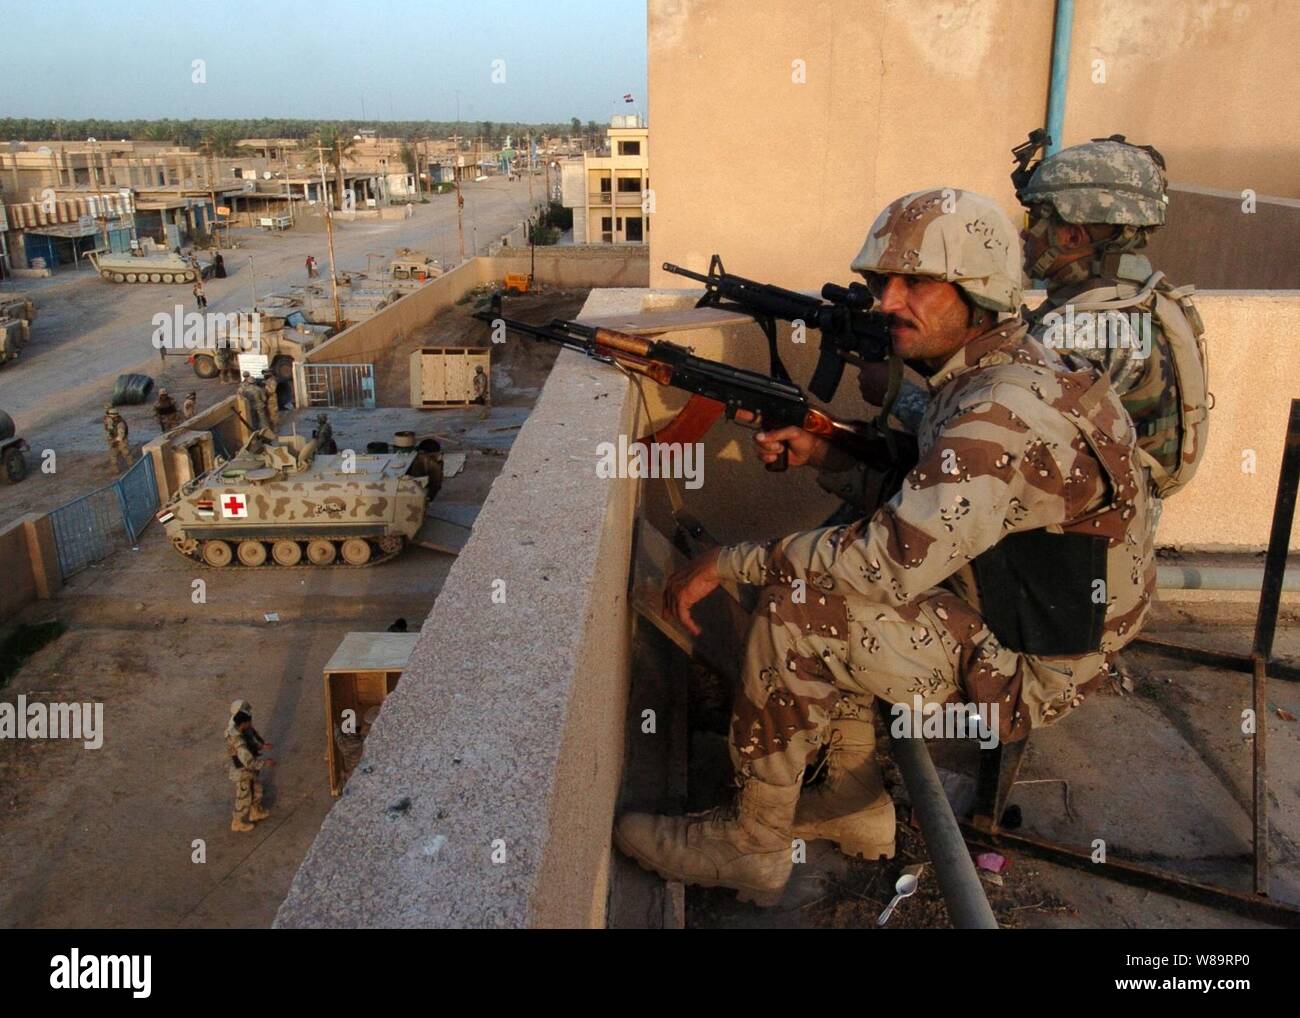 Iraqi army soldier Zatar Jeba (left) and U.S. Army Pfc. Yasuo Albert share a rooftop gun position on a coalition forces building during counter-insurgency operations in Tarmiya, Iraq, on March 25, 2006. Stock Photo